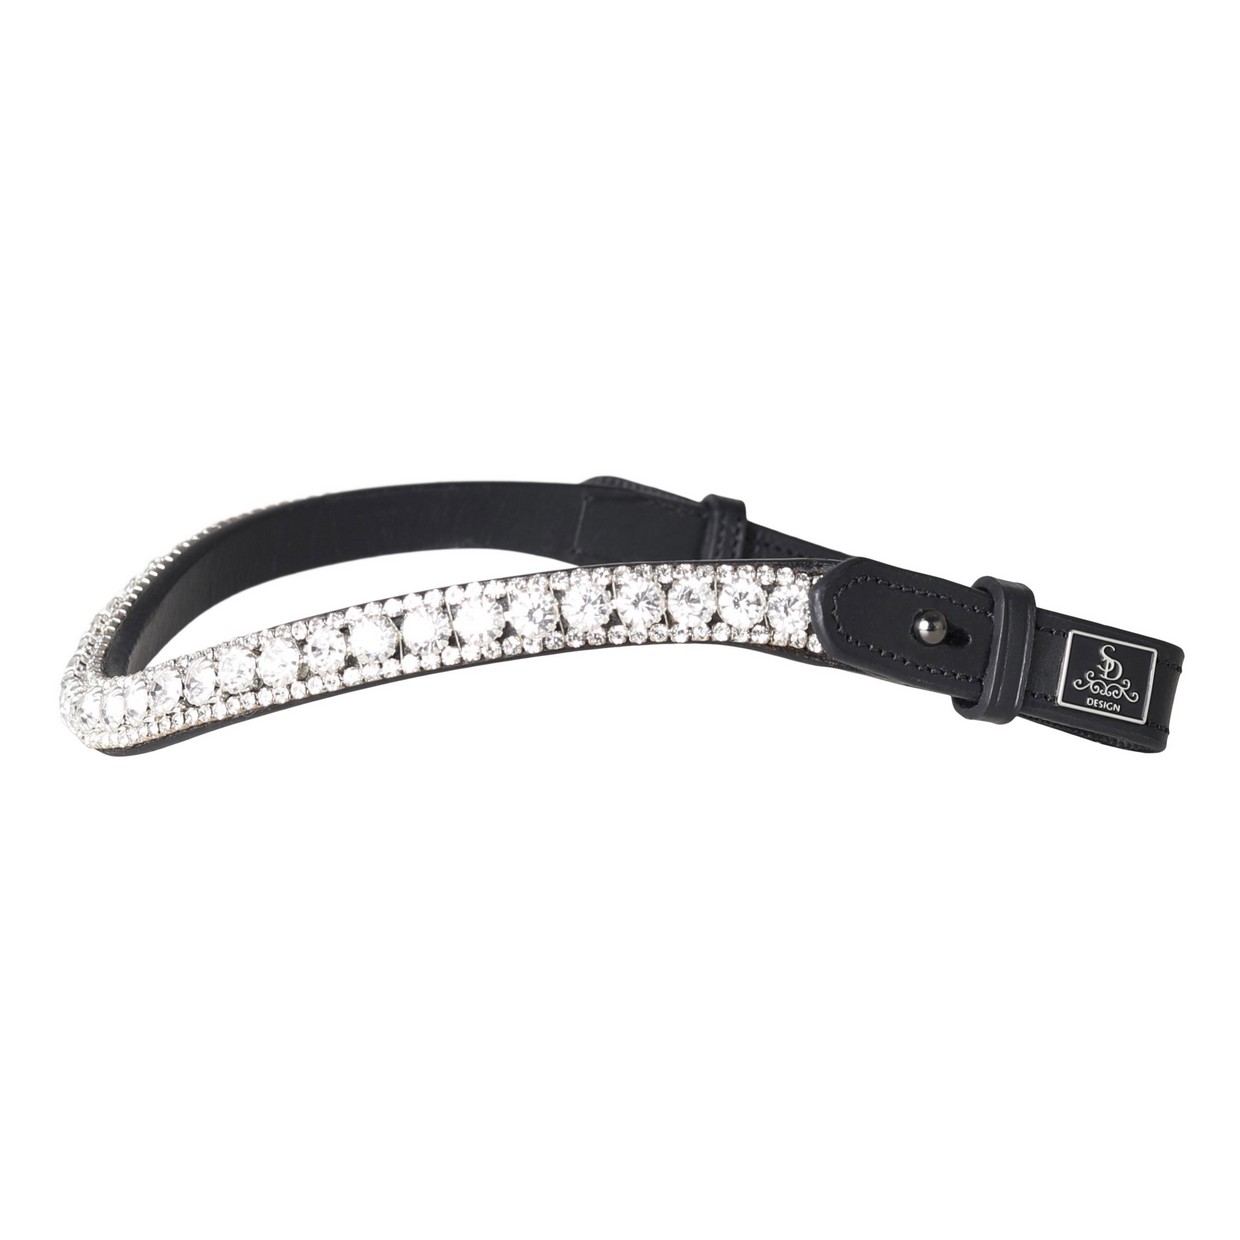 SD® OLYMBRIO BROWBAND. Black, Full